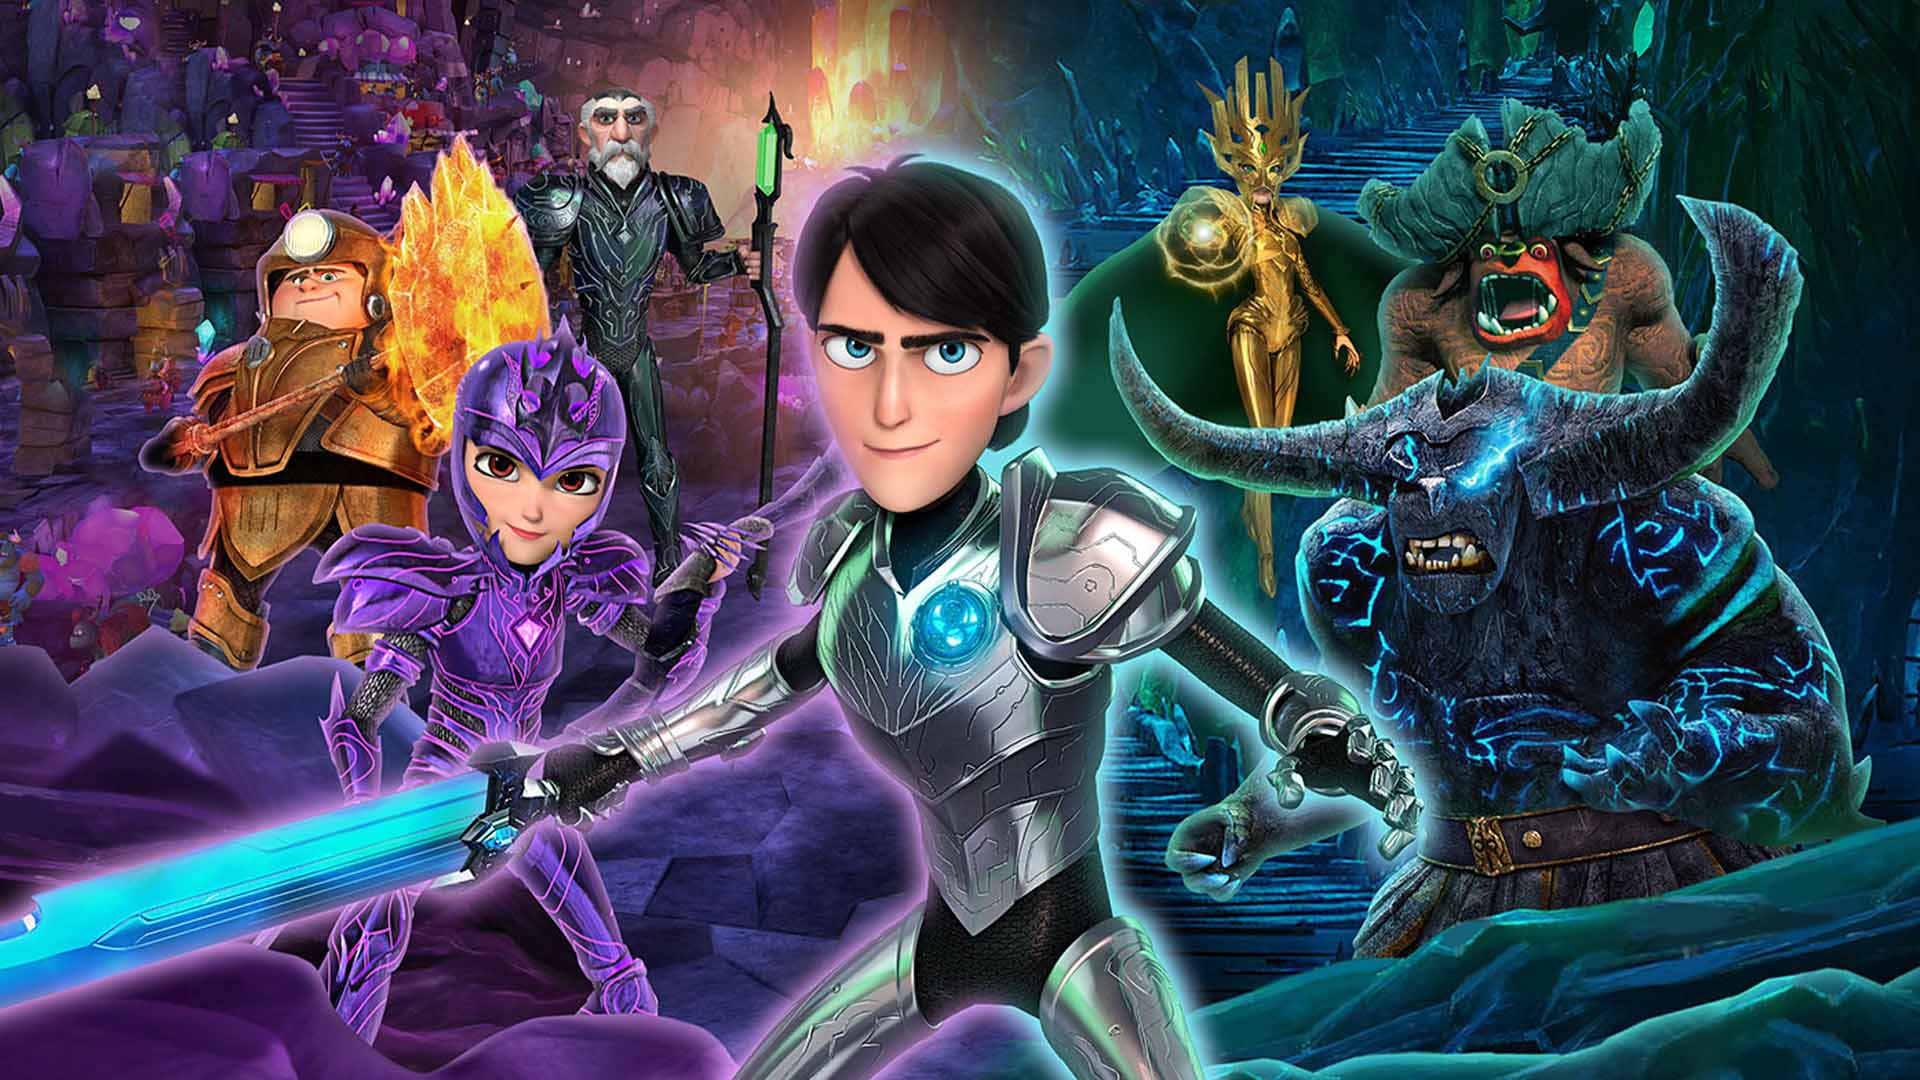 DreamWorks Animation and Netflix reveal new game based on Trollhunters: Tales of Arcadia